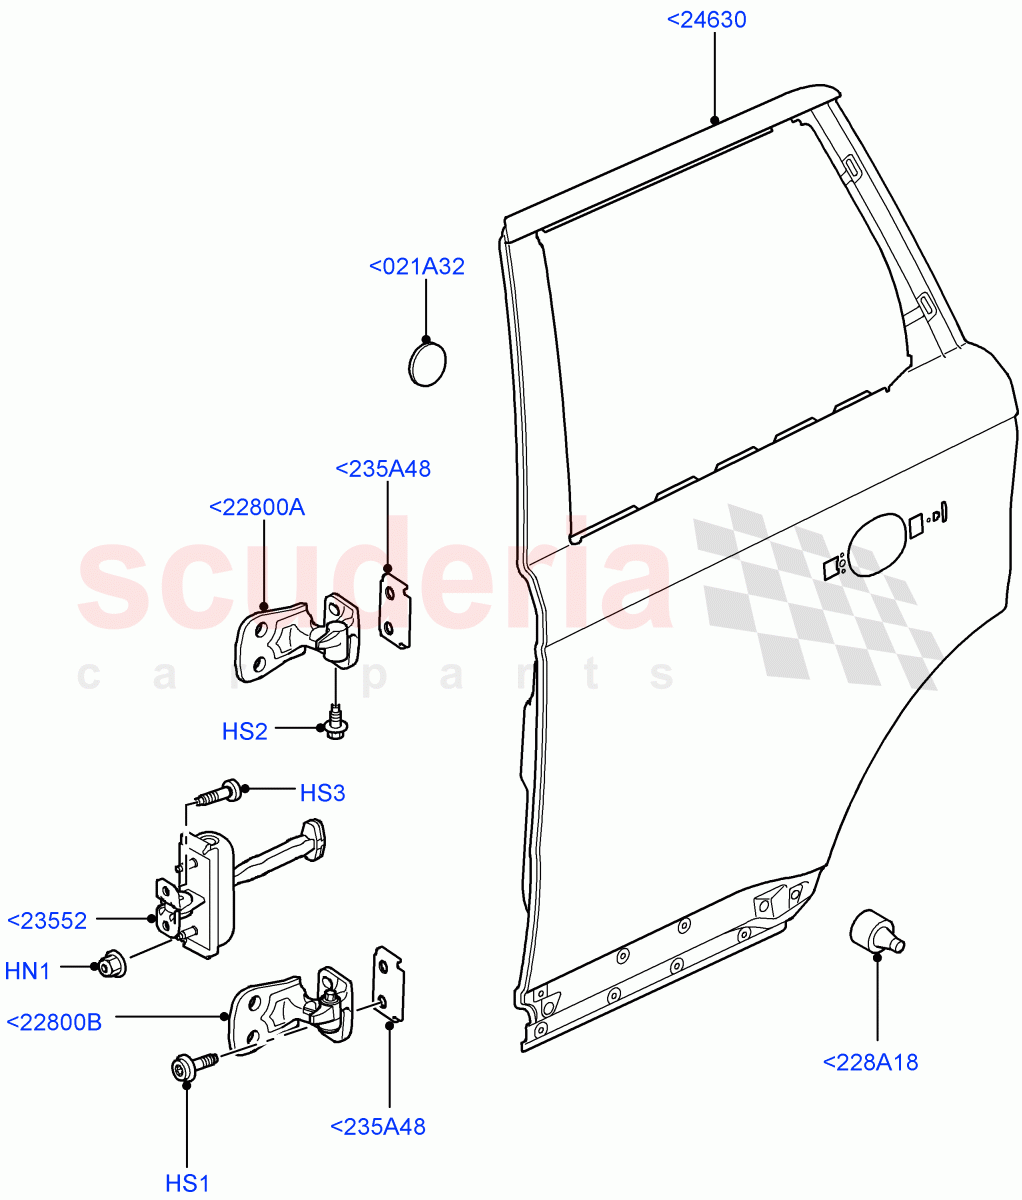 Rear Doors, Hinges & Weatherstrips(Door And Fixings)((V)FROMAA000001) of Land Rover Land Rover Range Rover Sport (2010-2013) [3.0 Diesel 24V DOHC TC]